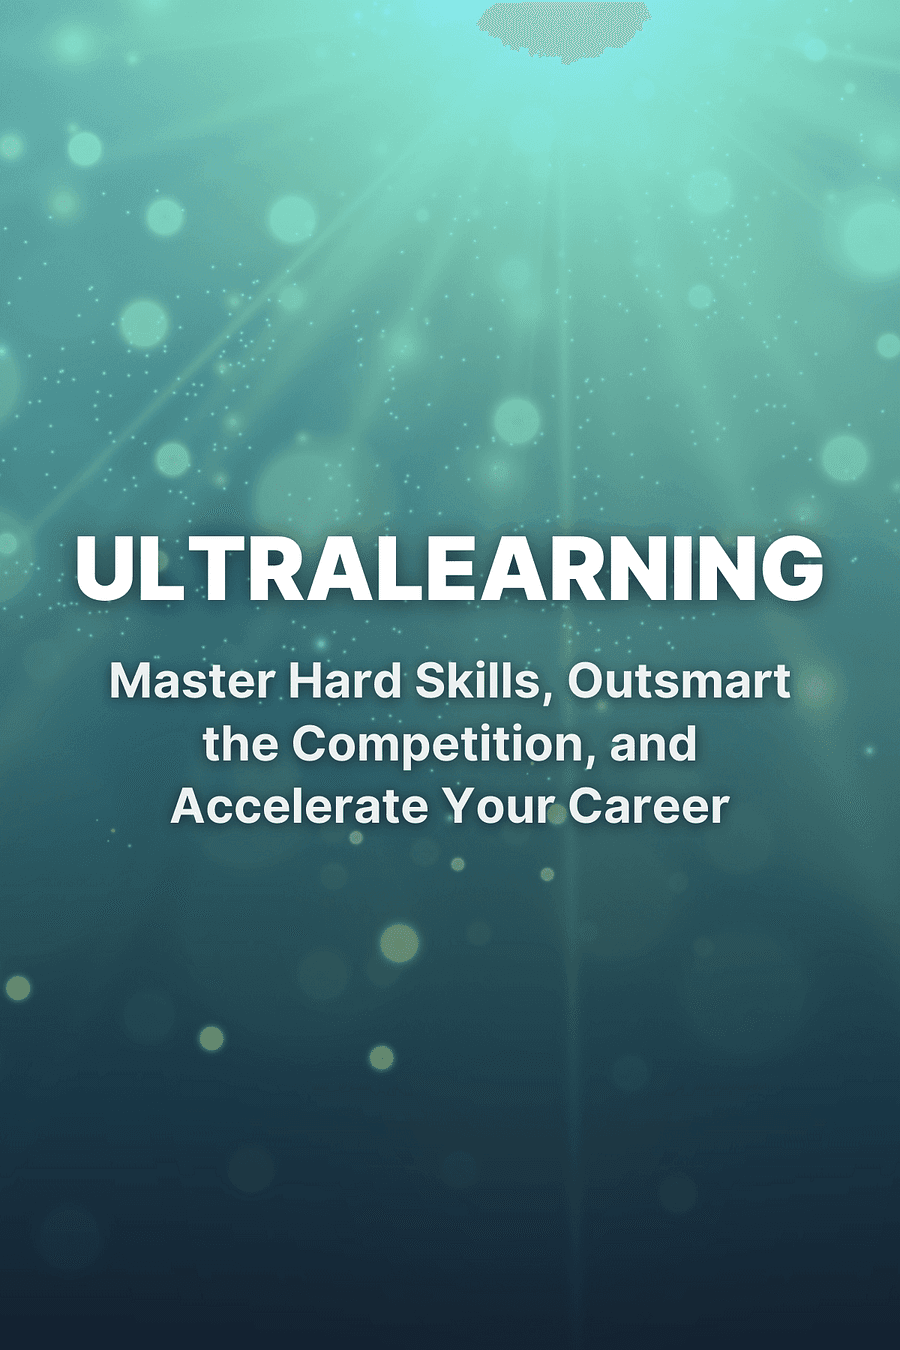 Ultralearning by Scott Young - Book Summary